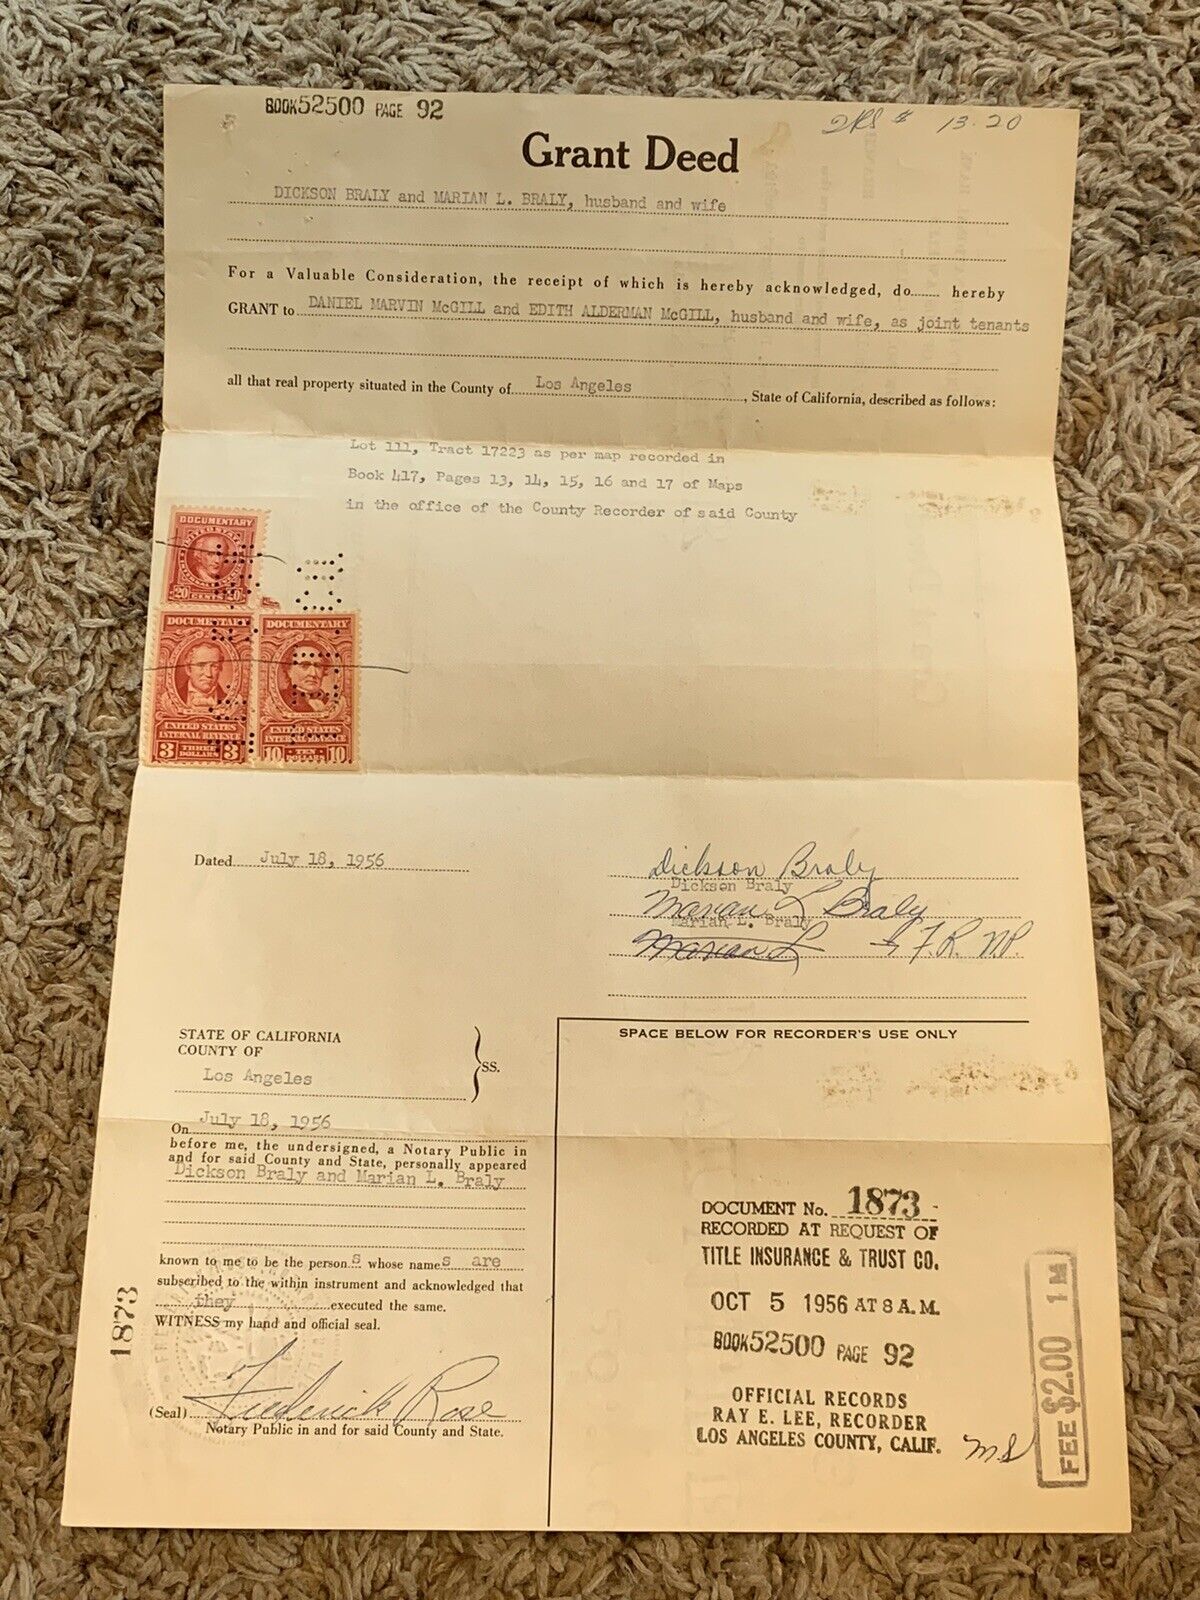 1956 LOS ANGELES GRANT DEED WITH PERFORATIONS TITLE INSURANCE & TRUST